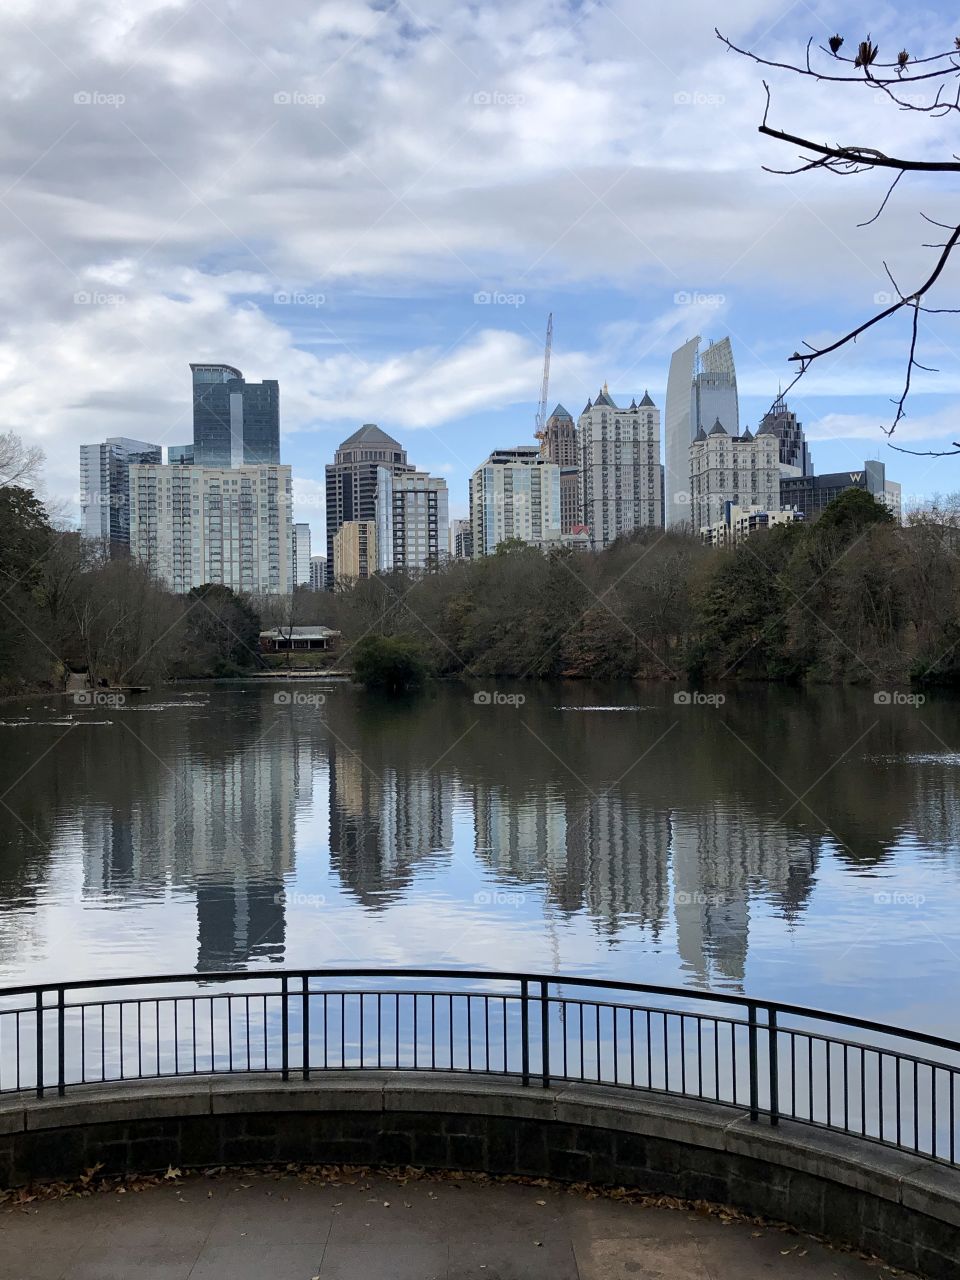 The downtown Atlanta skyline reflected in Piedmont Park’s lake- winter shot from the gazebo area.